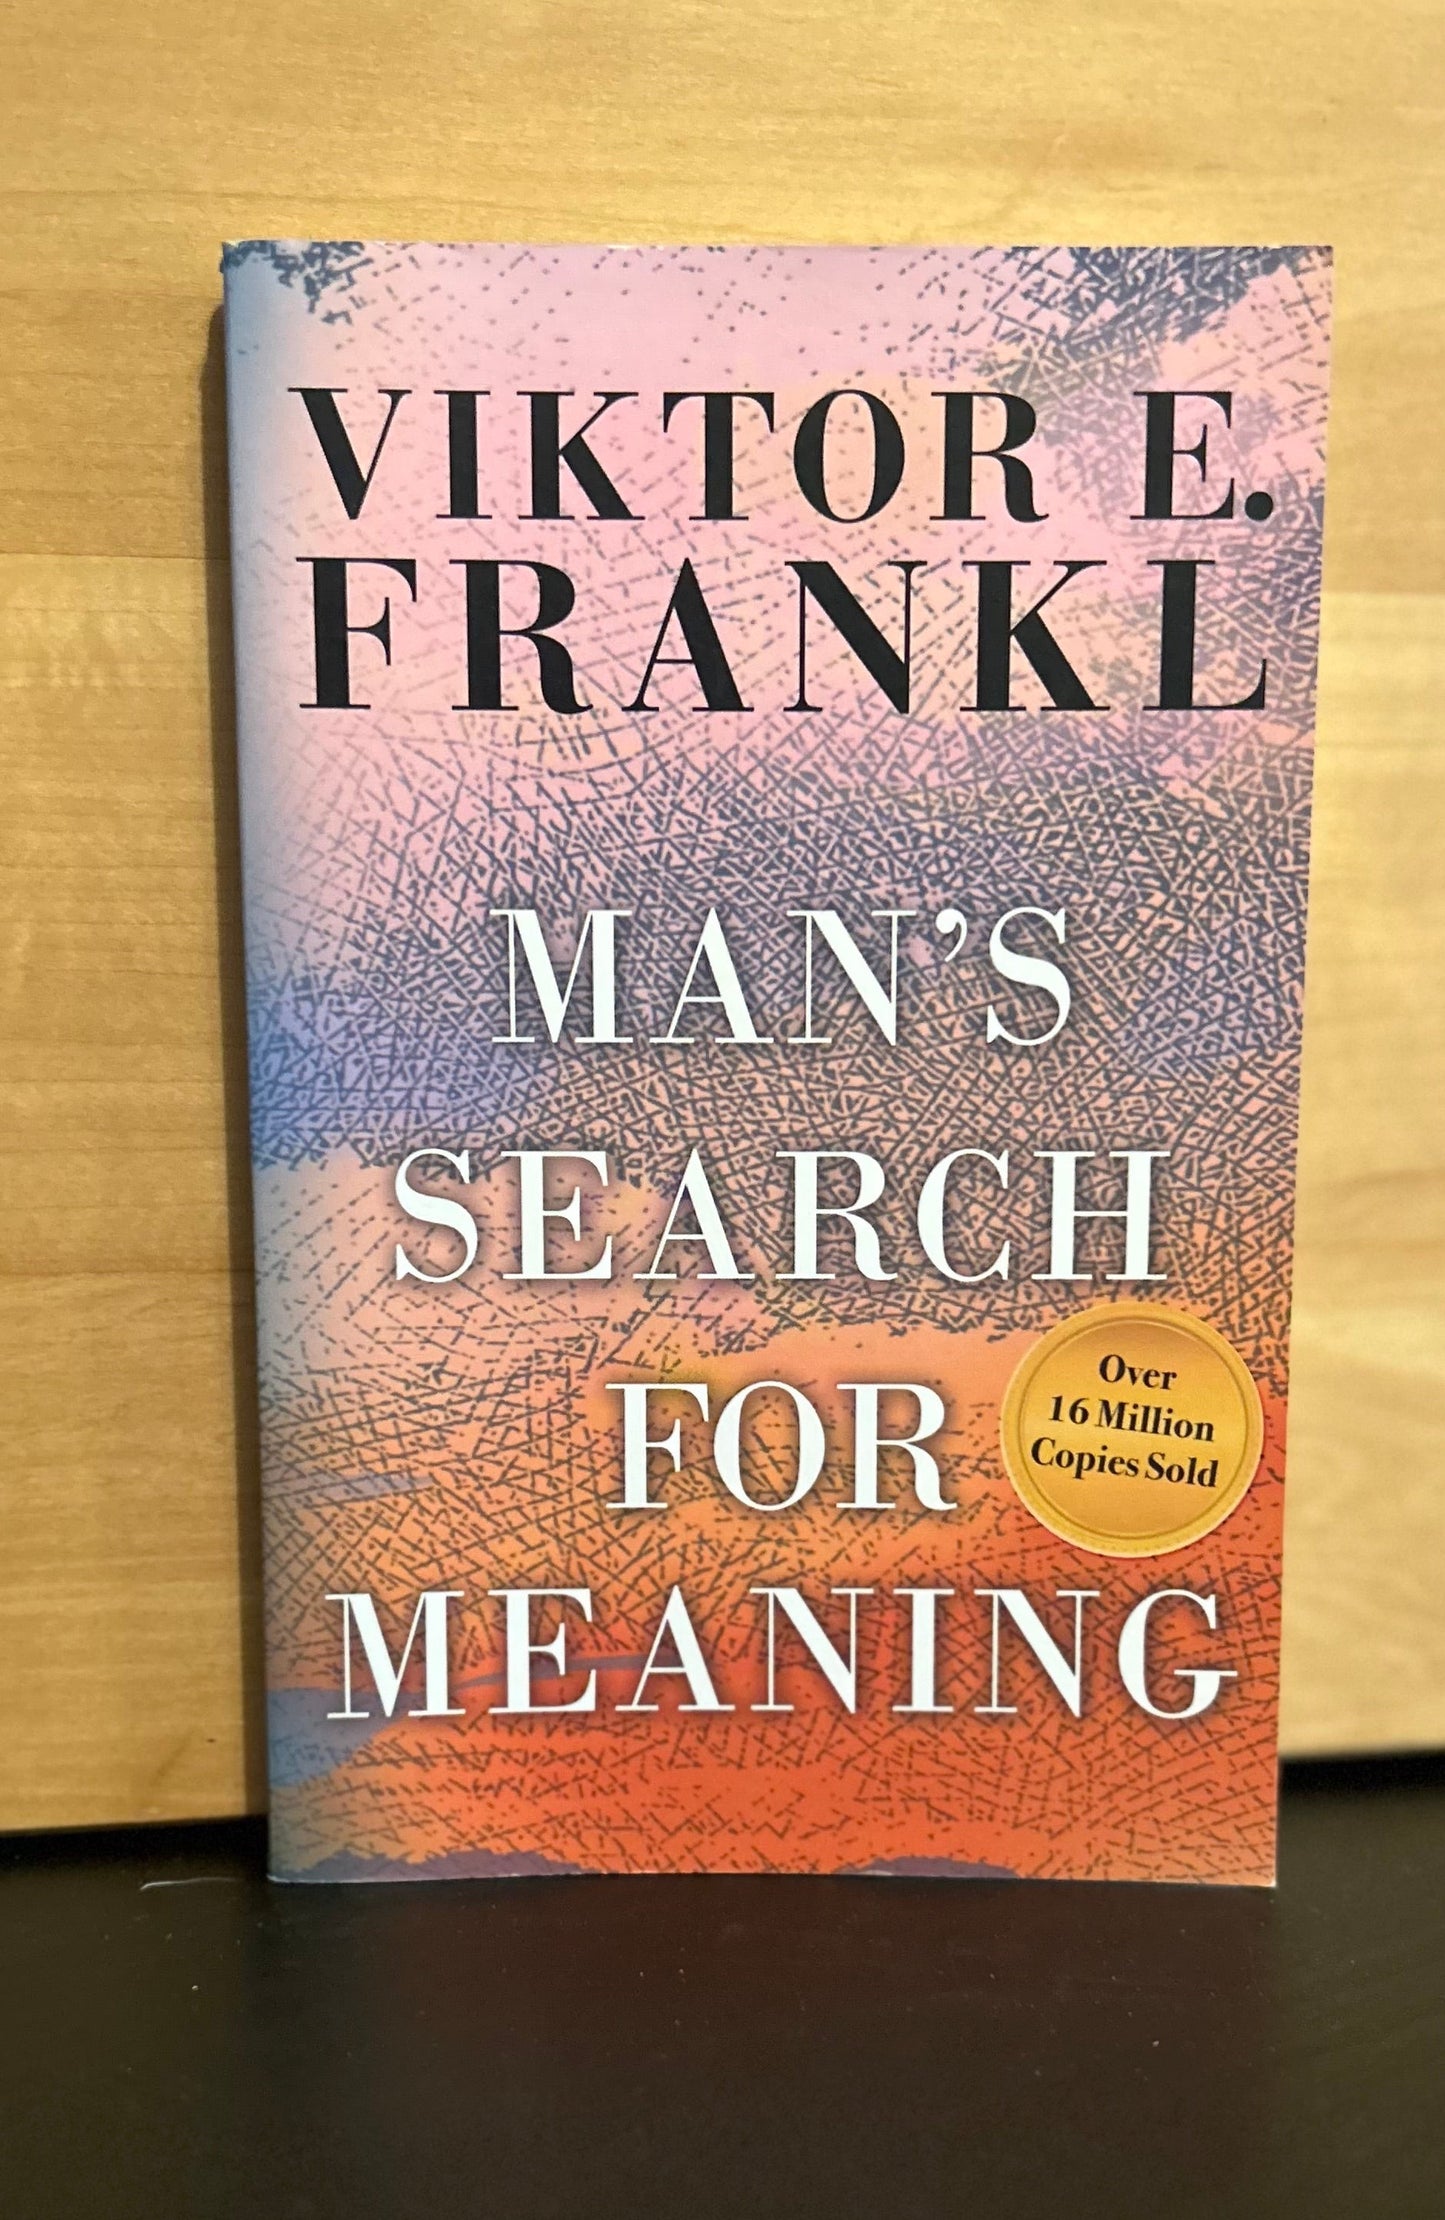 Man's Search for Meaning - Viktor Frankl